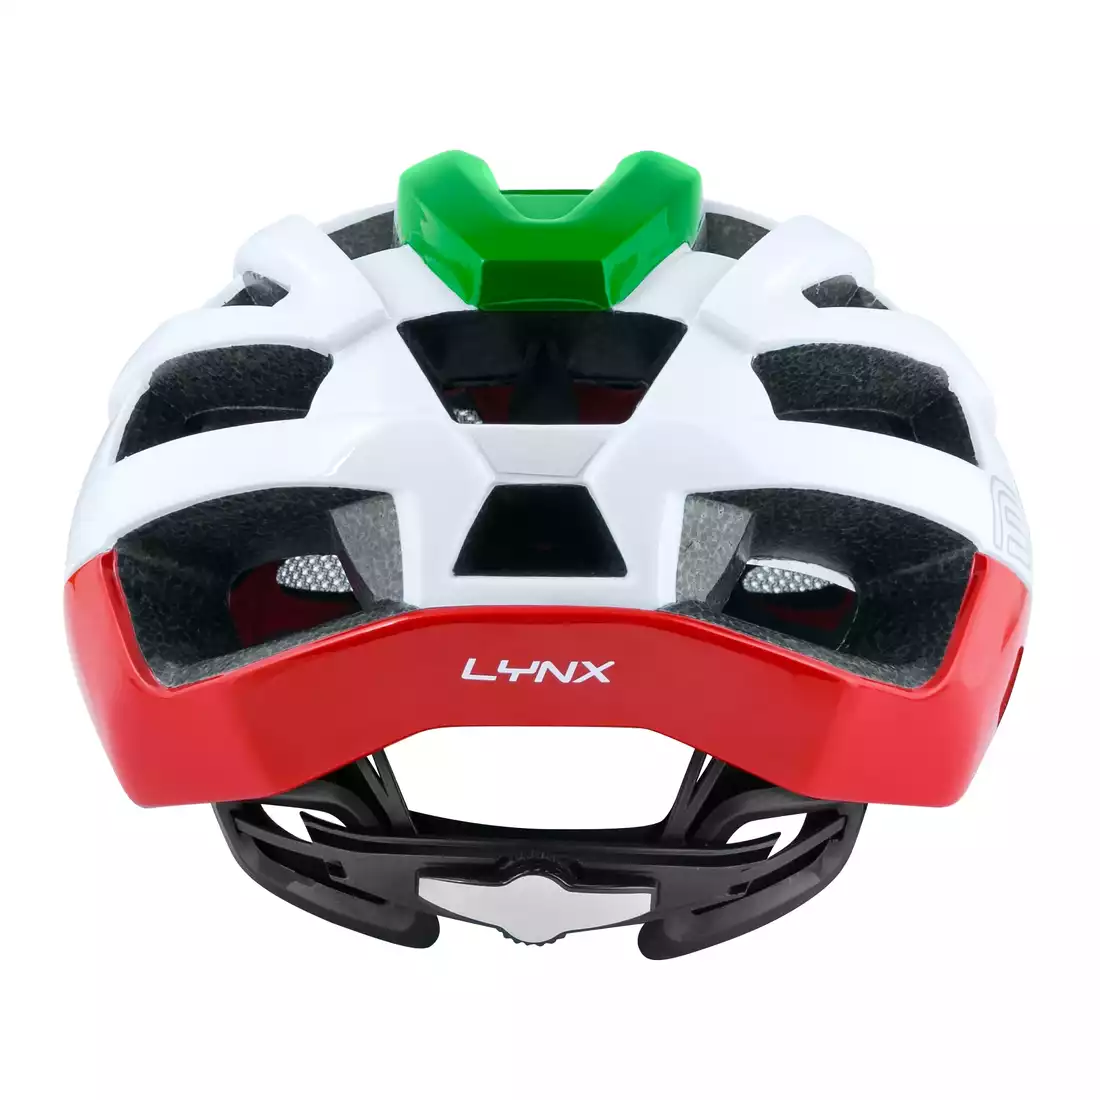 FORCE LYNX kask rowerowy Italy